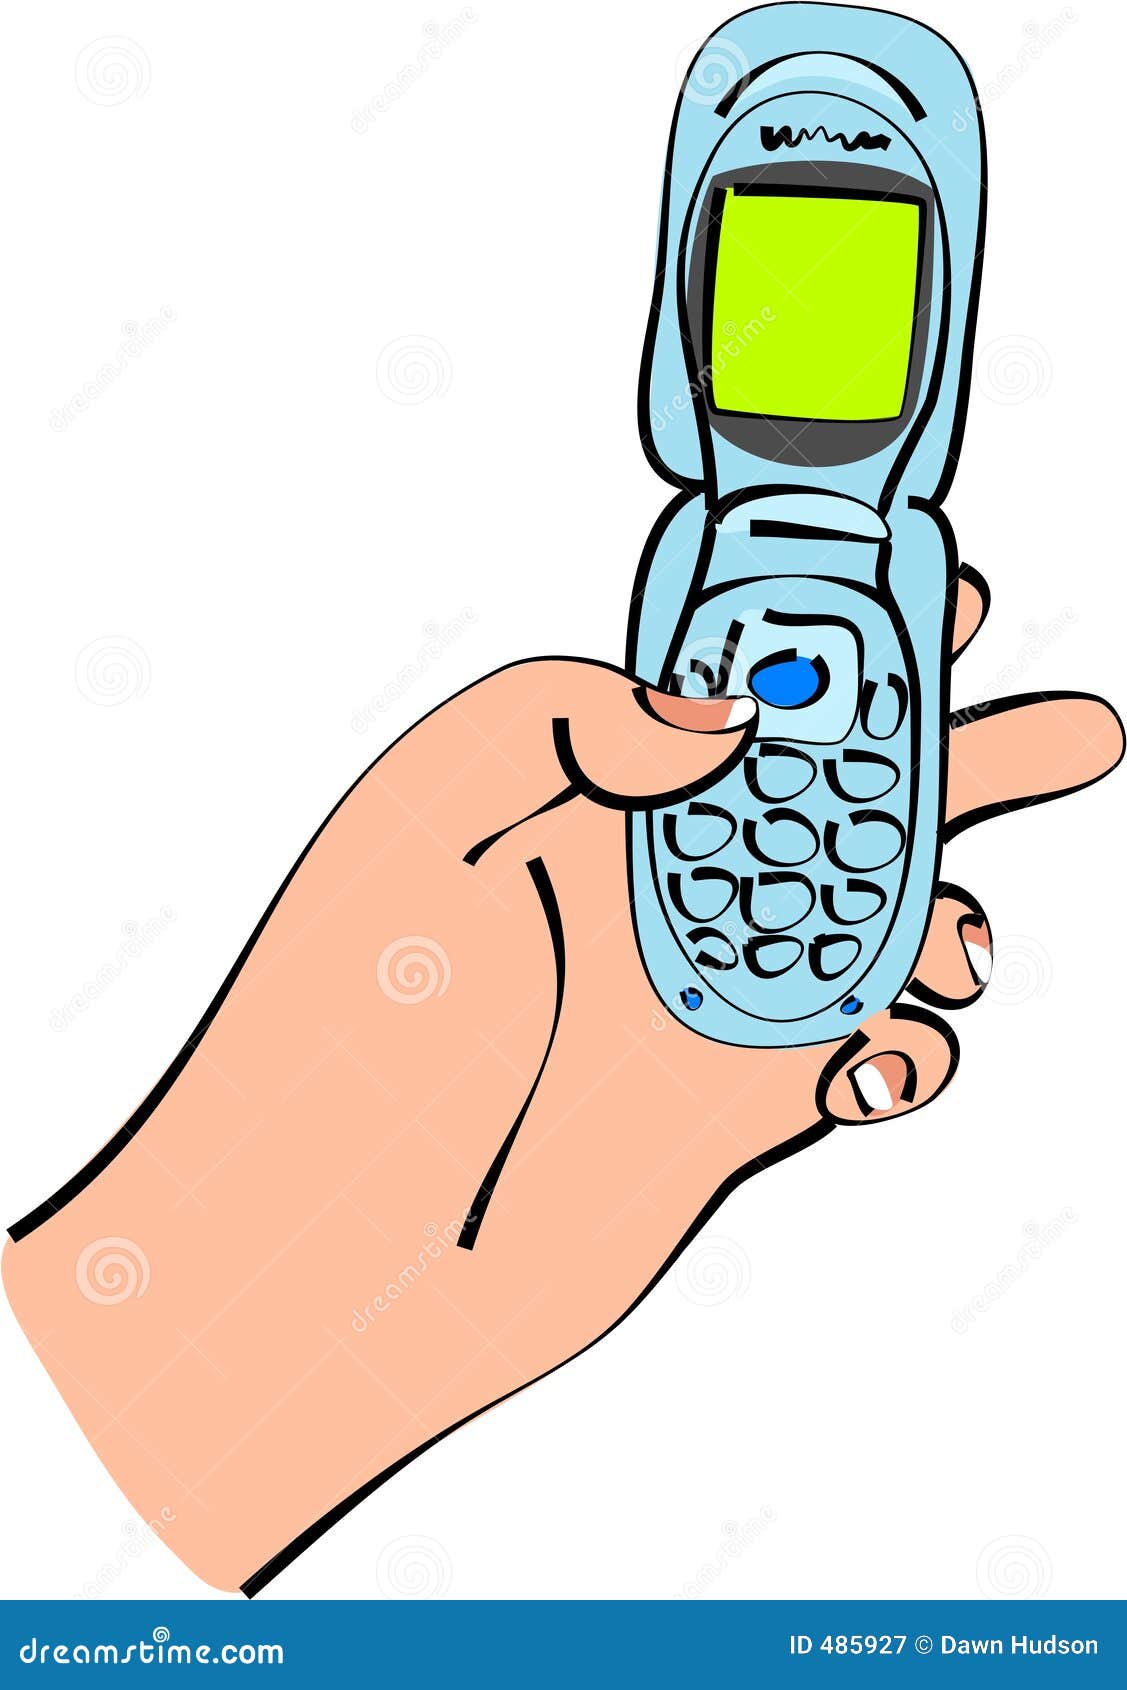 girl texting clipart - photo #15